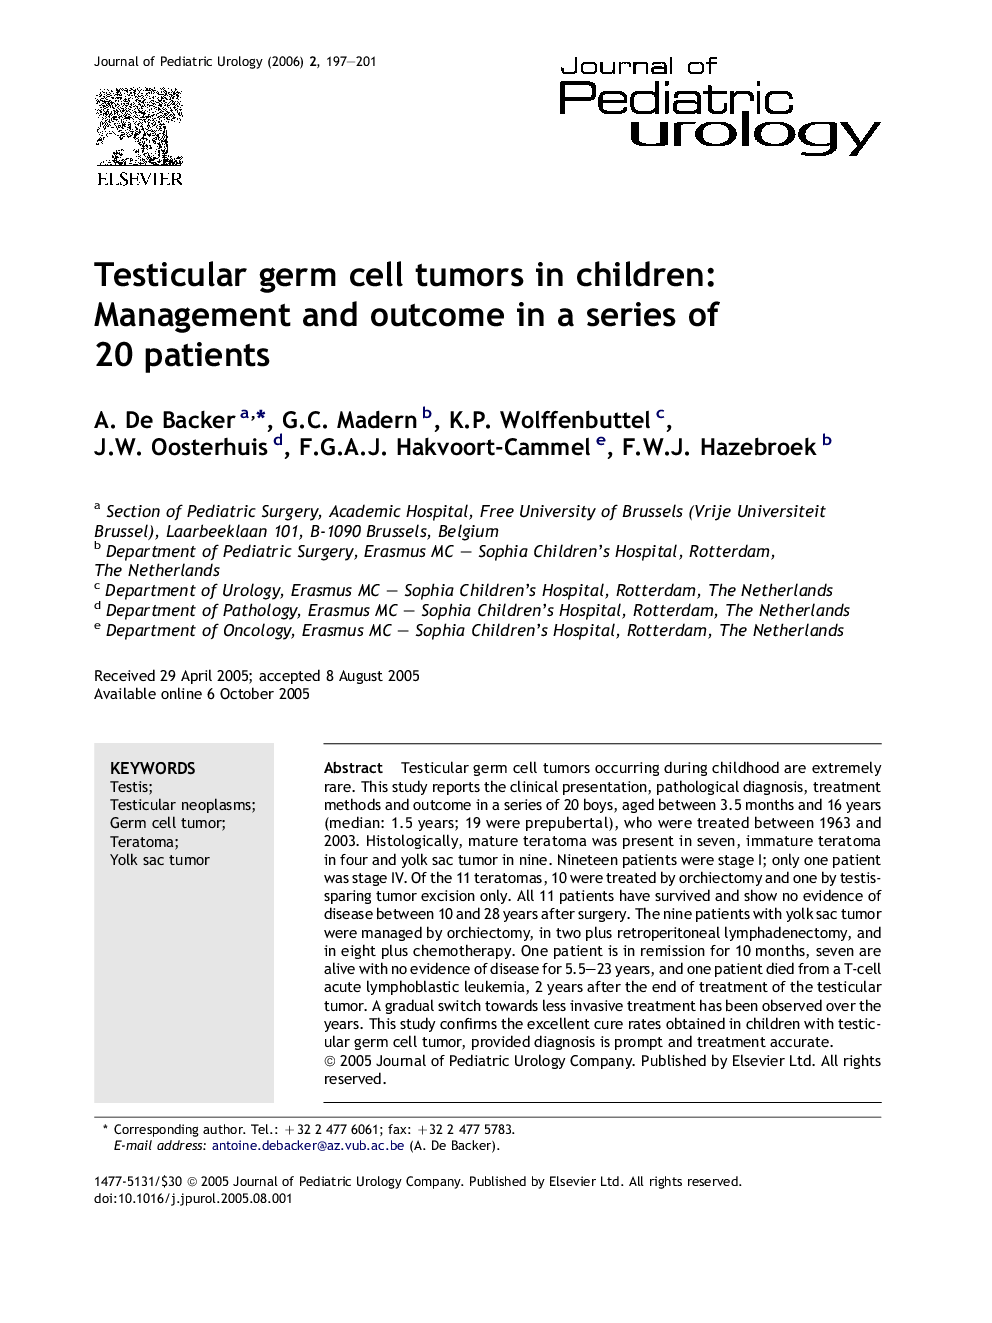 Testicular germ cell tumors in children: Management and outcome in a series of 20 patients